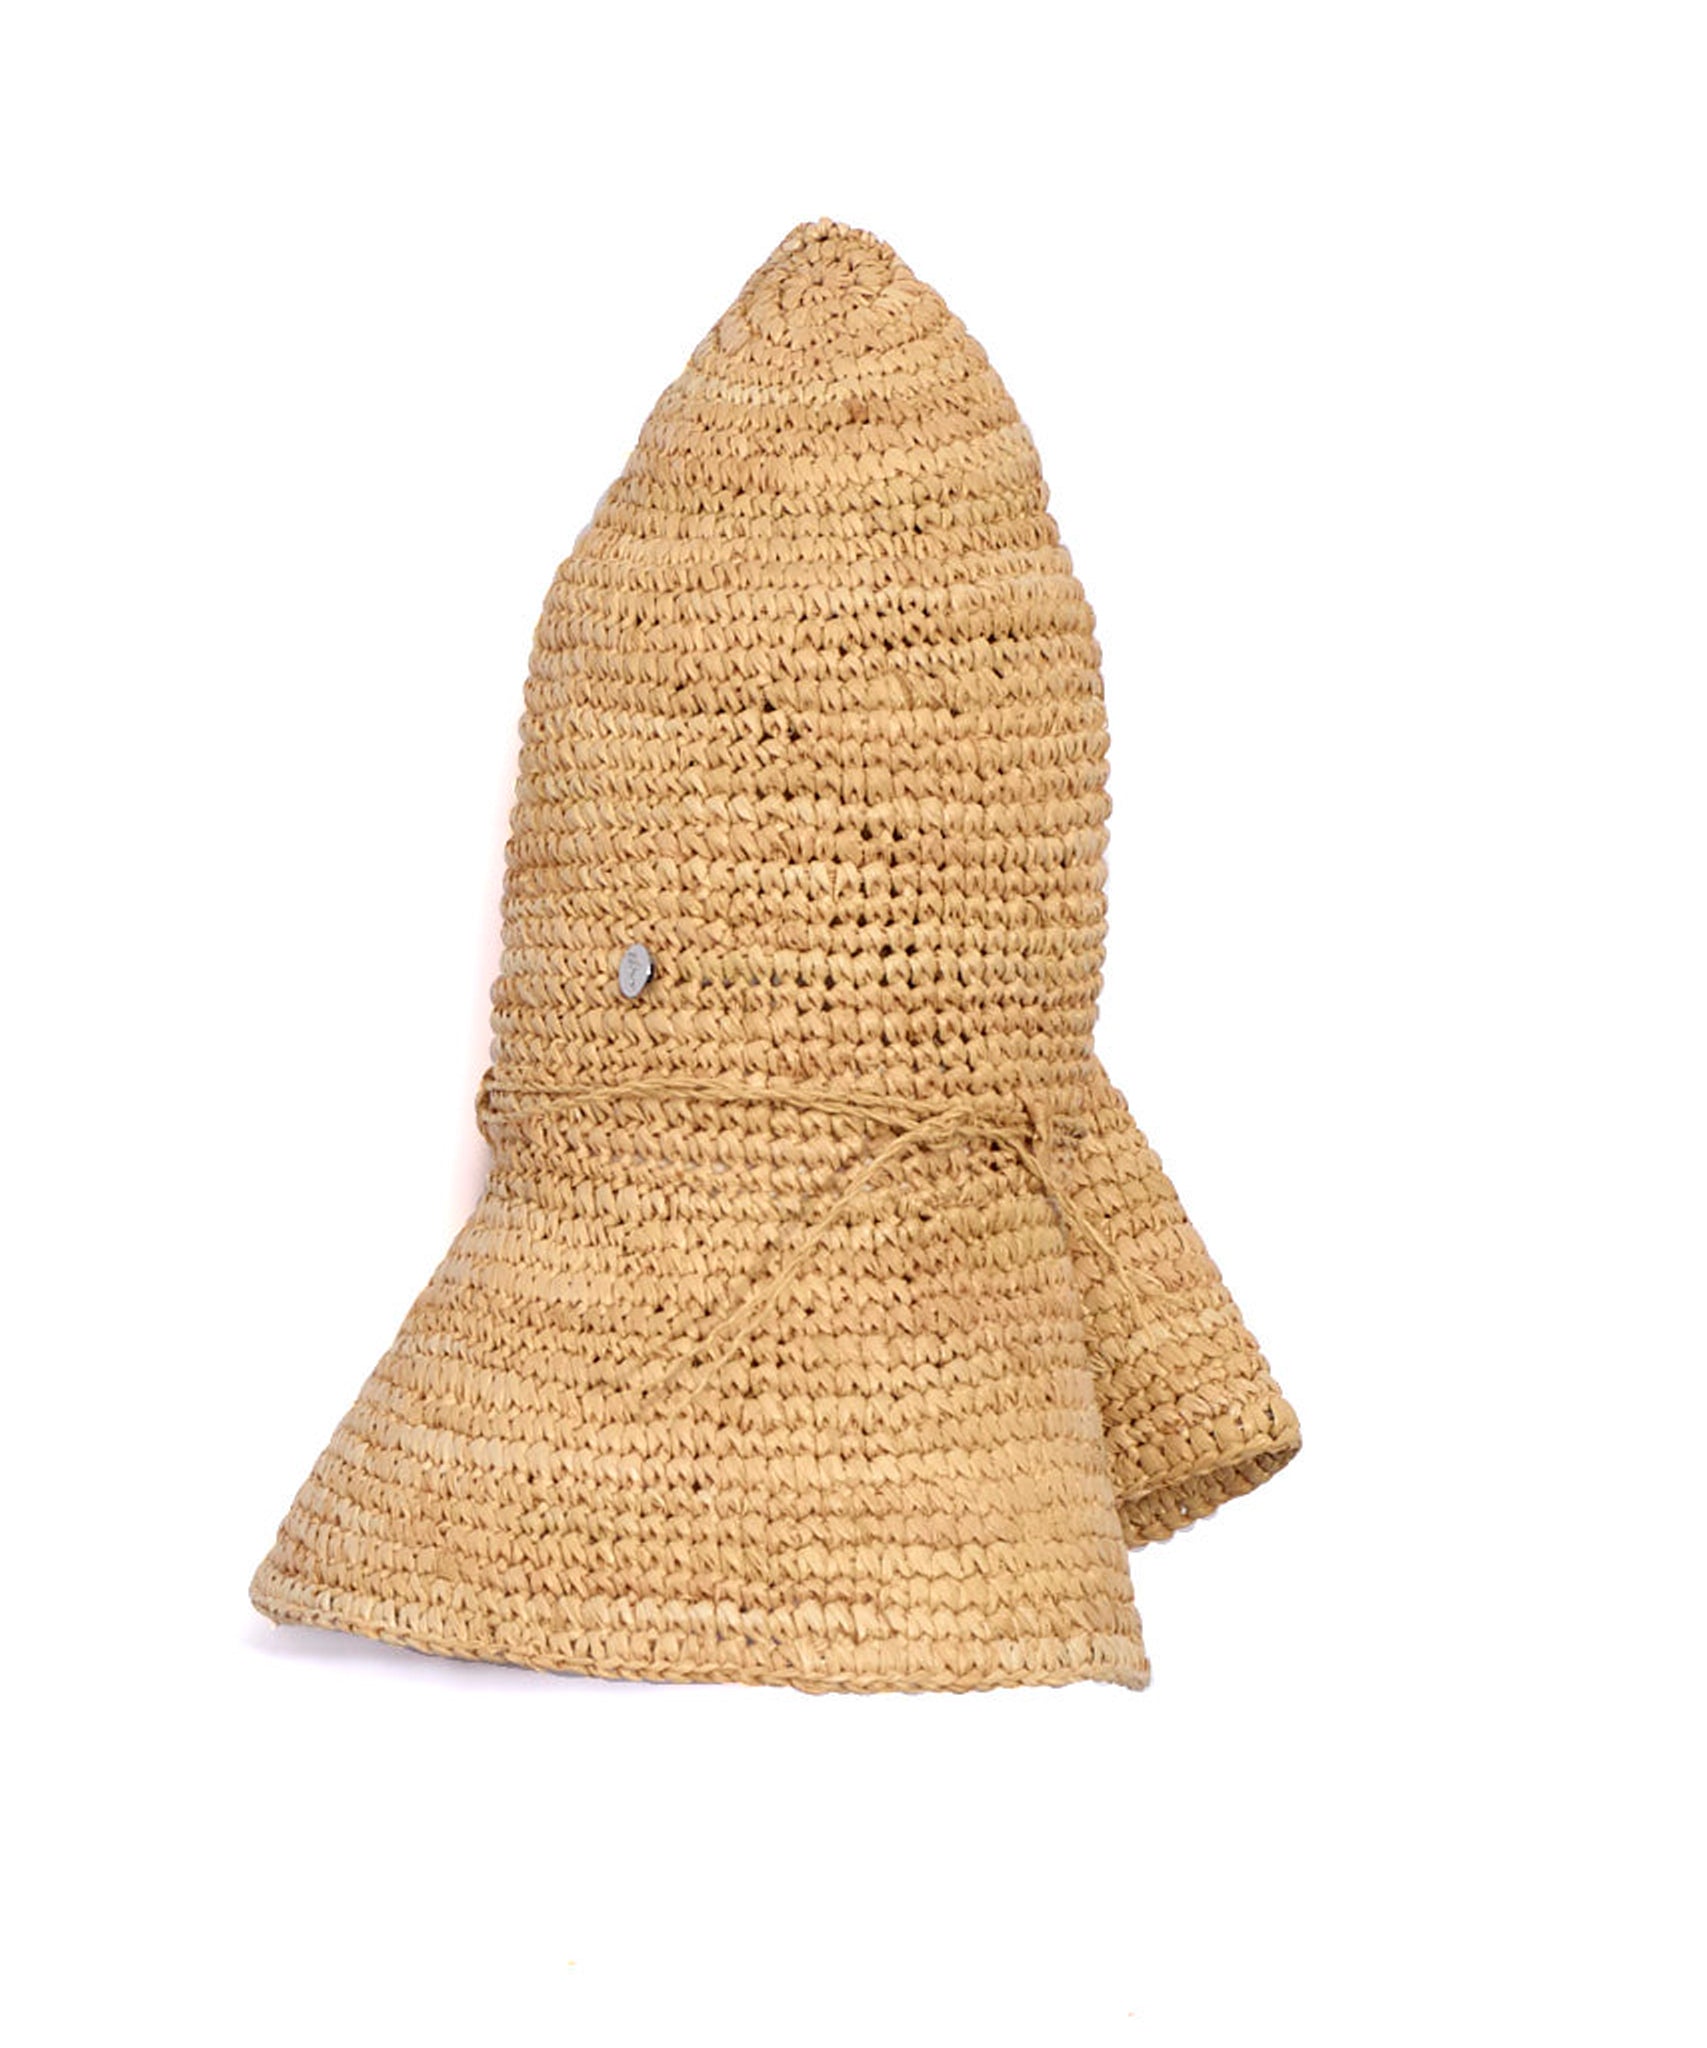 Natural Woven Fabric Bucket Hat